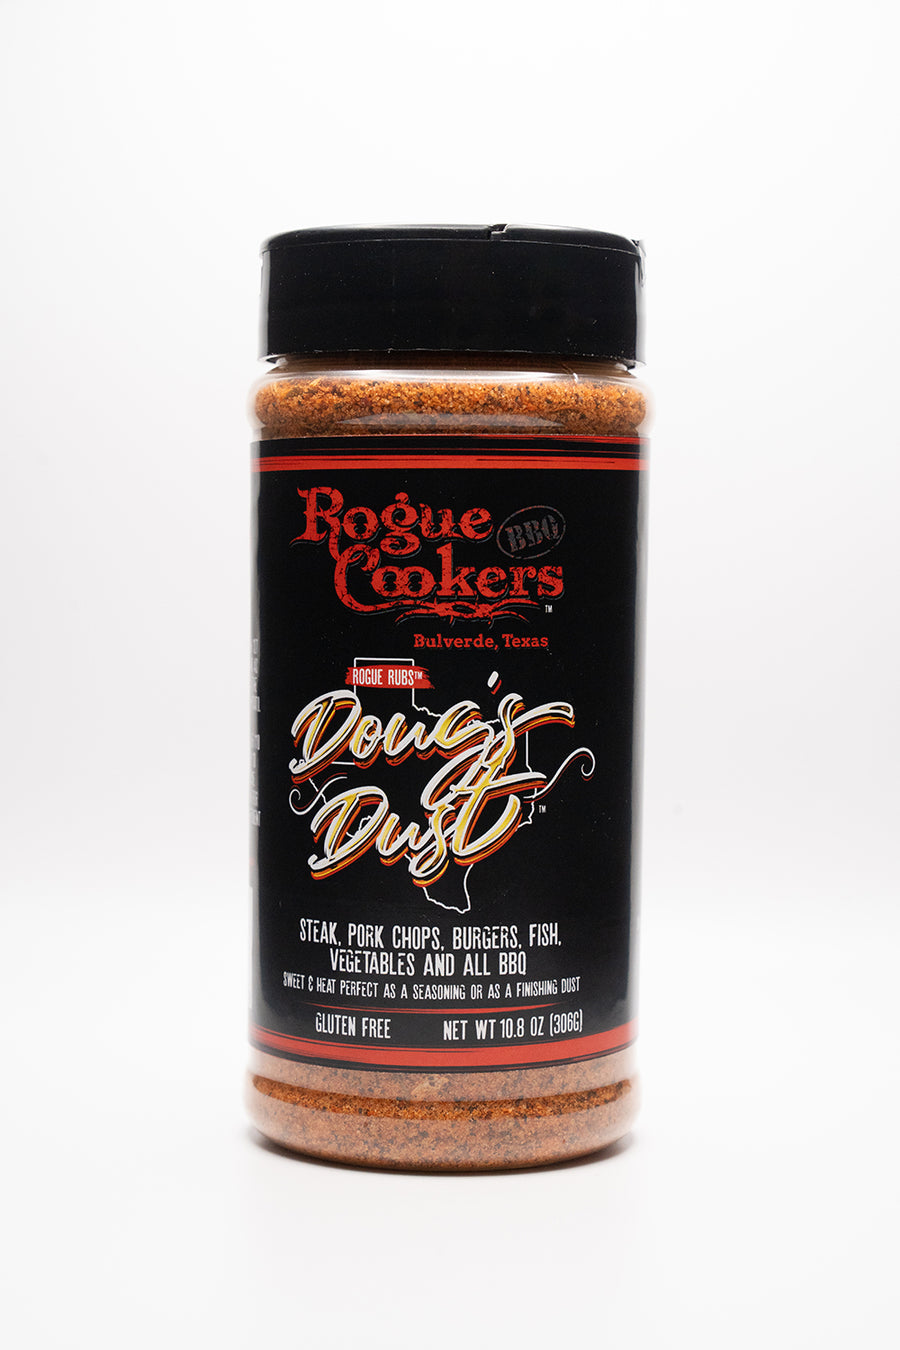 Add Rogue Cookers Doug's Dust to all your meats for award winning results.